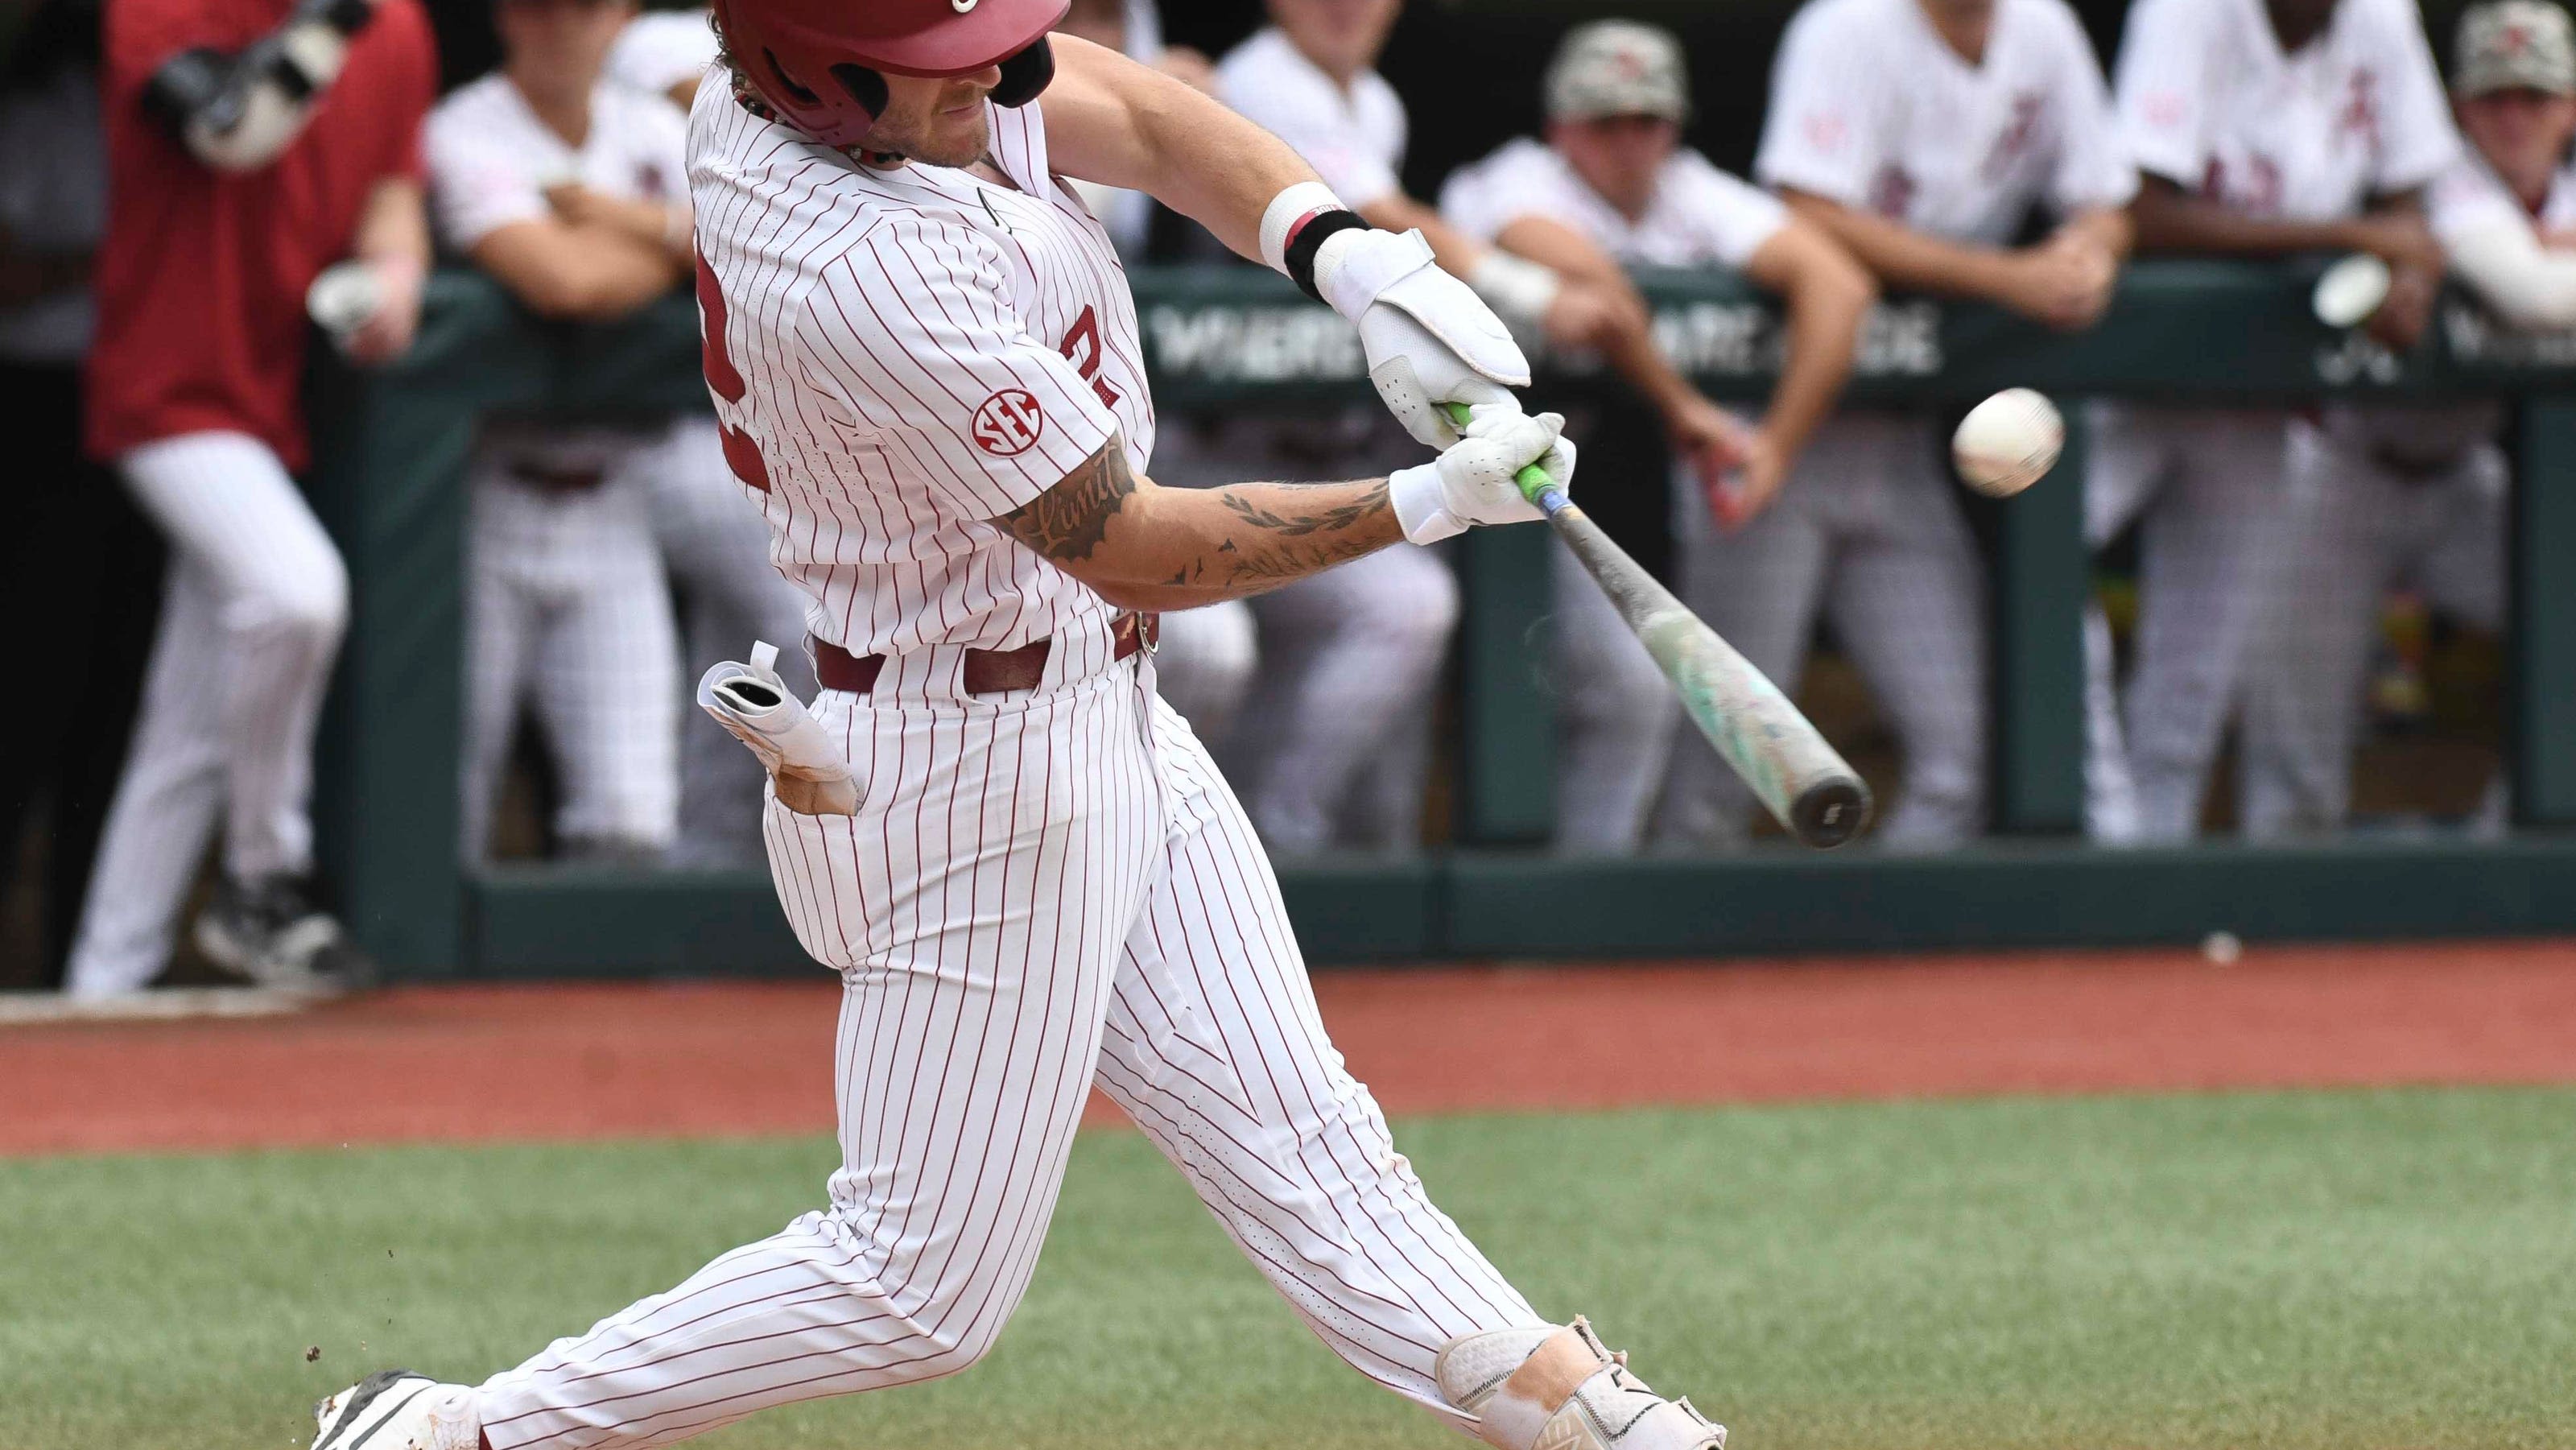 How to watch Alabama baseball at Troy: time, streaming information for midweek game